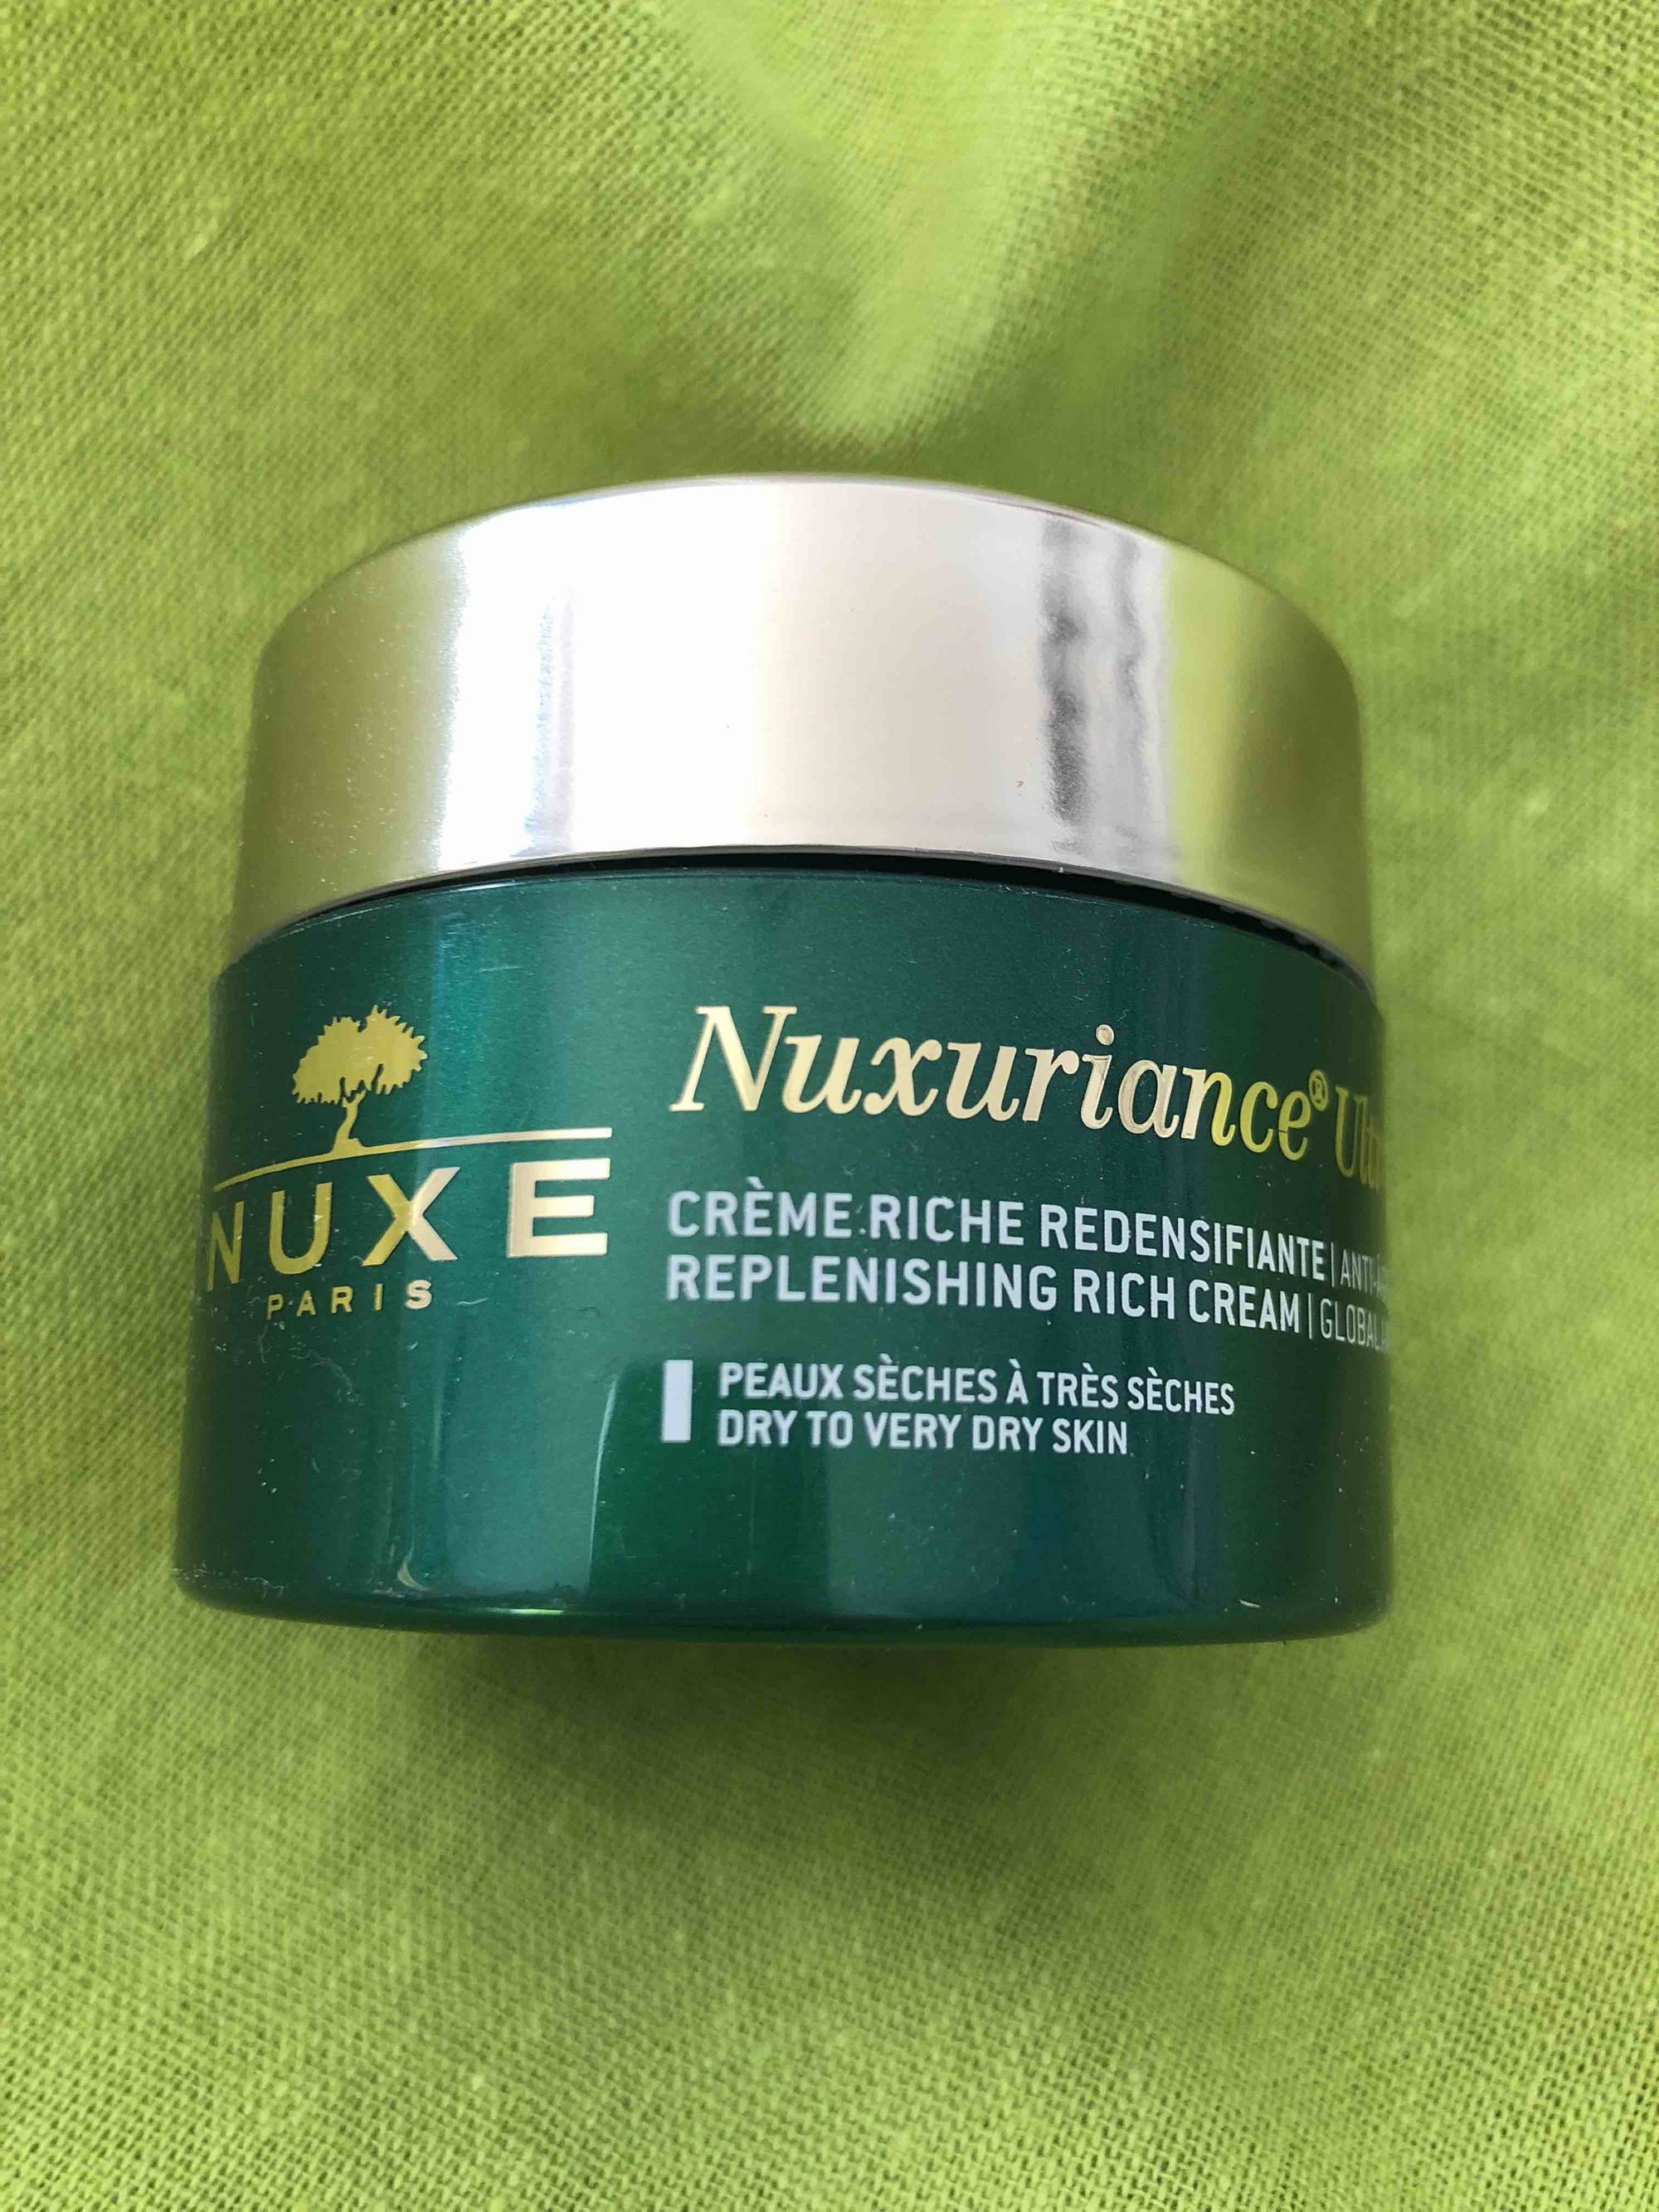 NUXE - Nuxuriance ultra - Crème riche redensifiante anti-âge global 